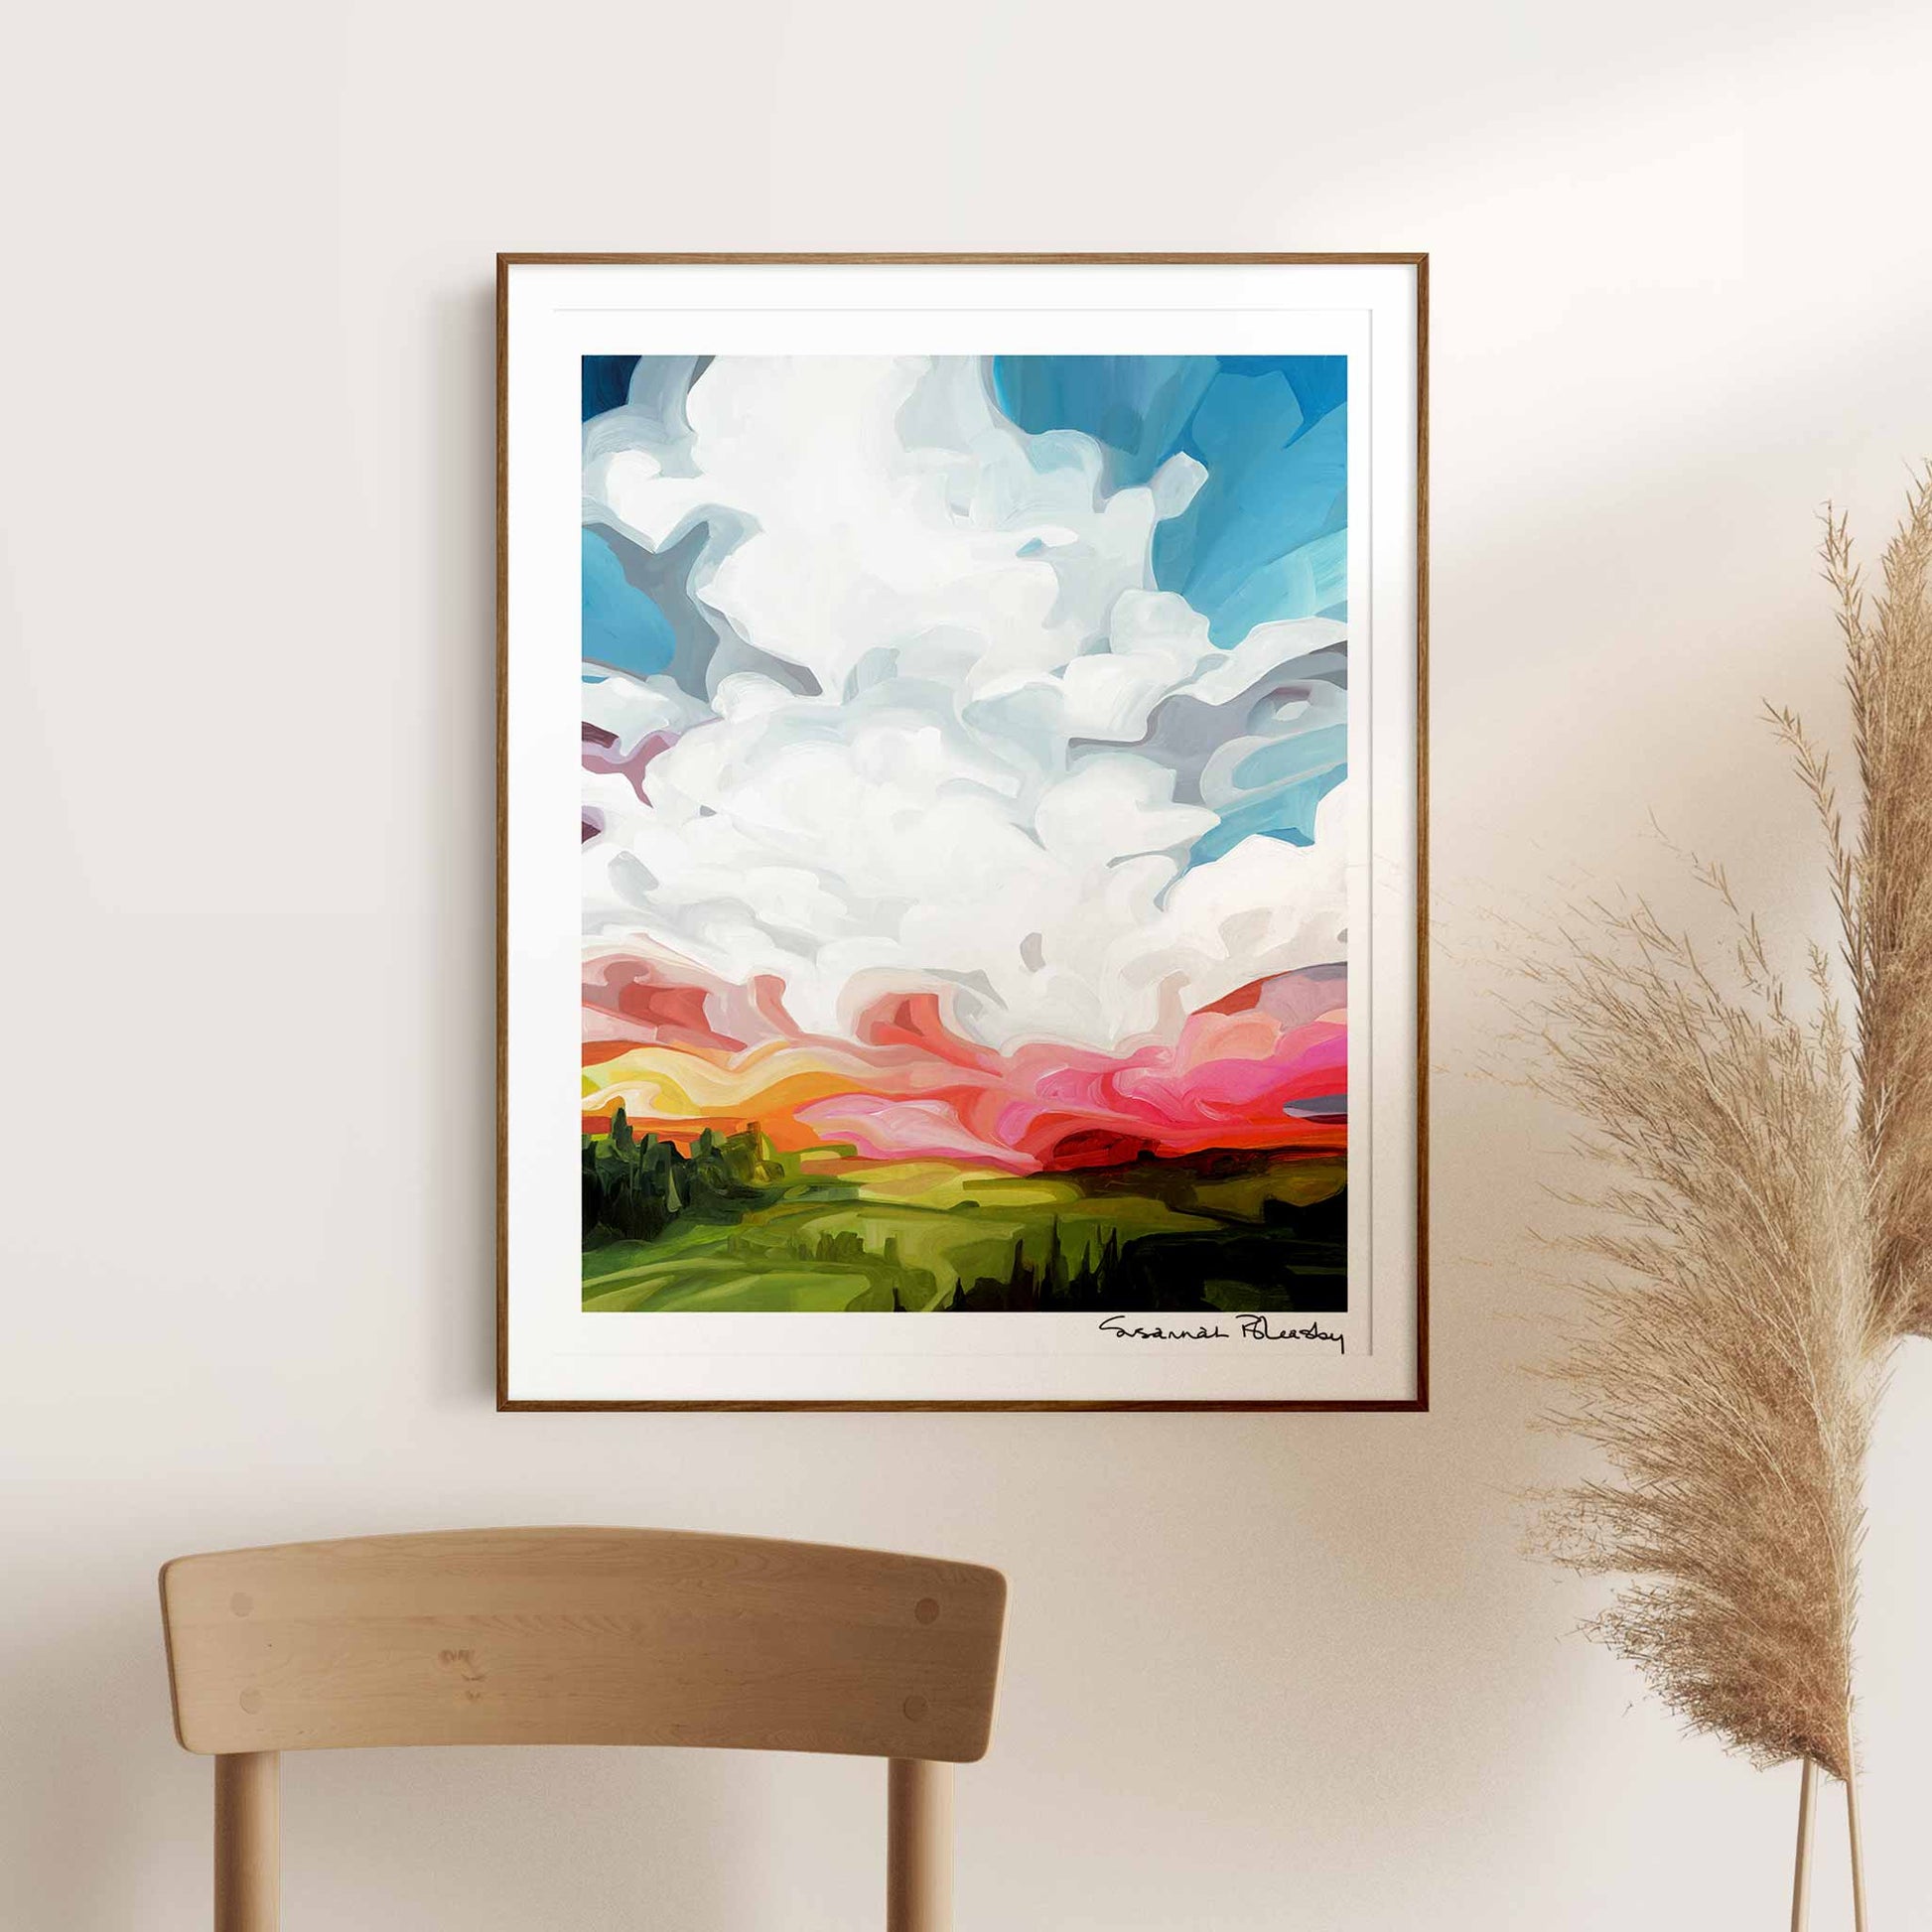 vertical art print of an vibrant abstract sky painting depicting a colourful late afternoon sky in summer by Canadian artist Susannah Bleasby